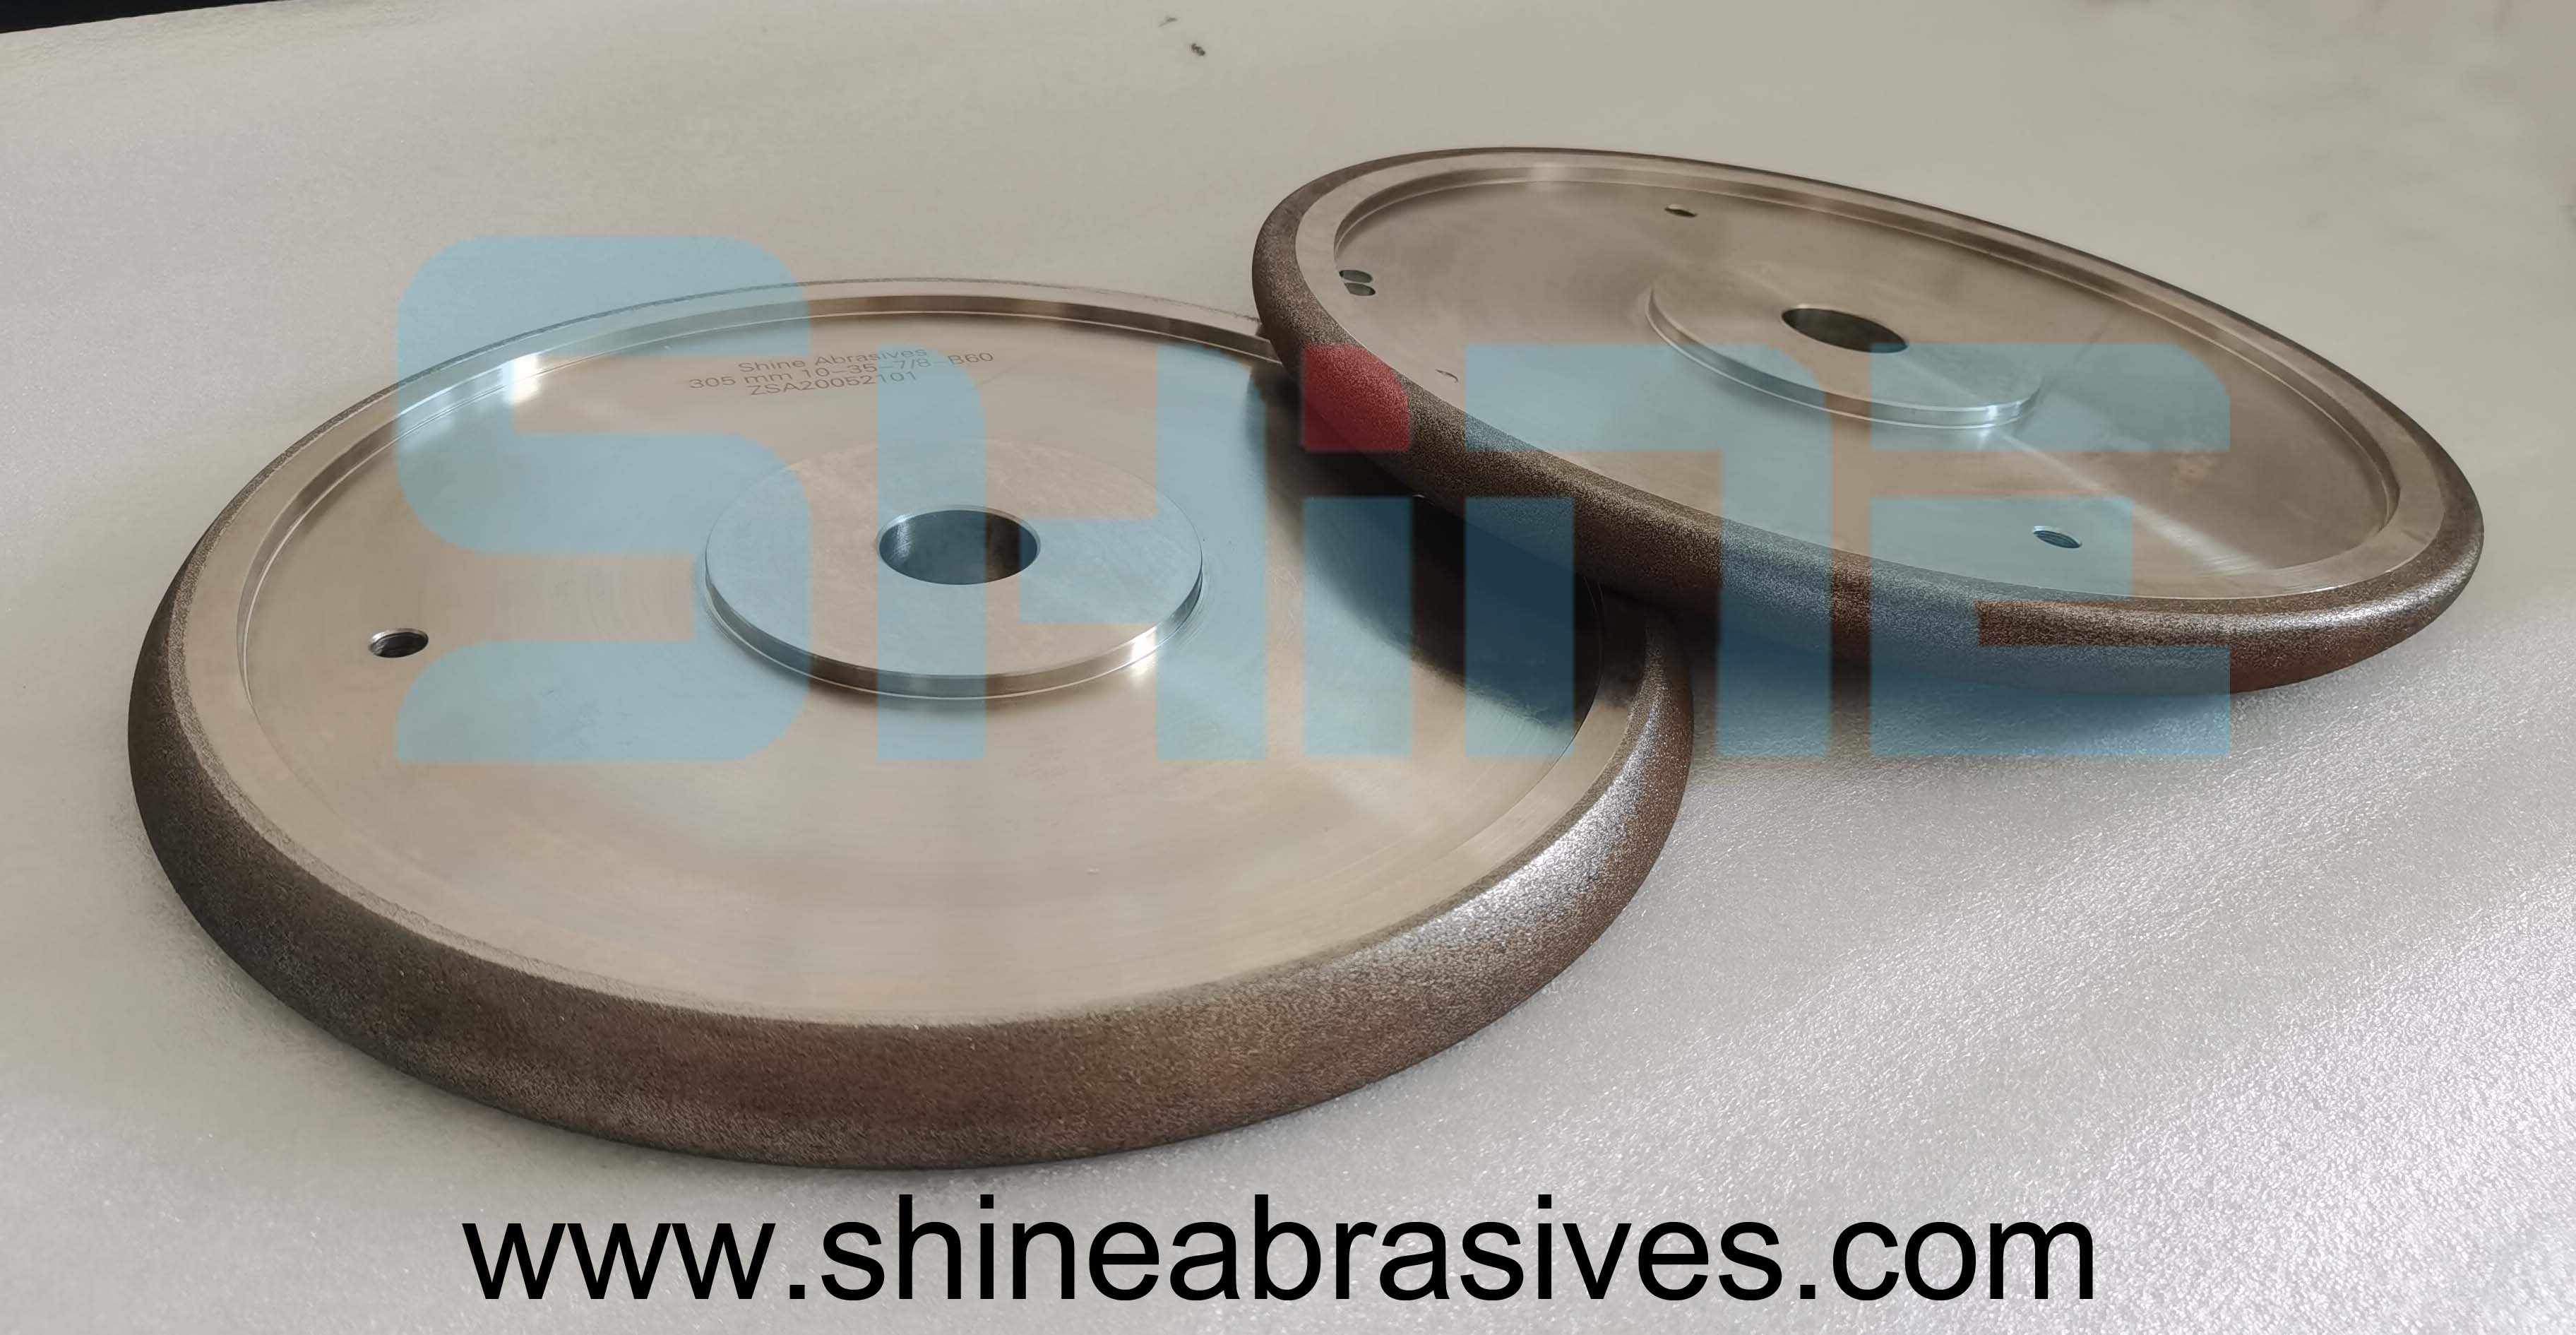 12 Inch CBN wheel  for band saw blade